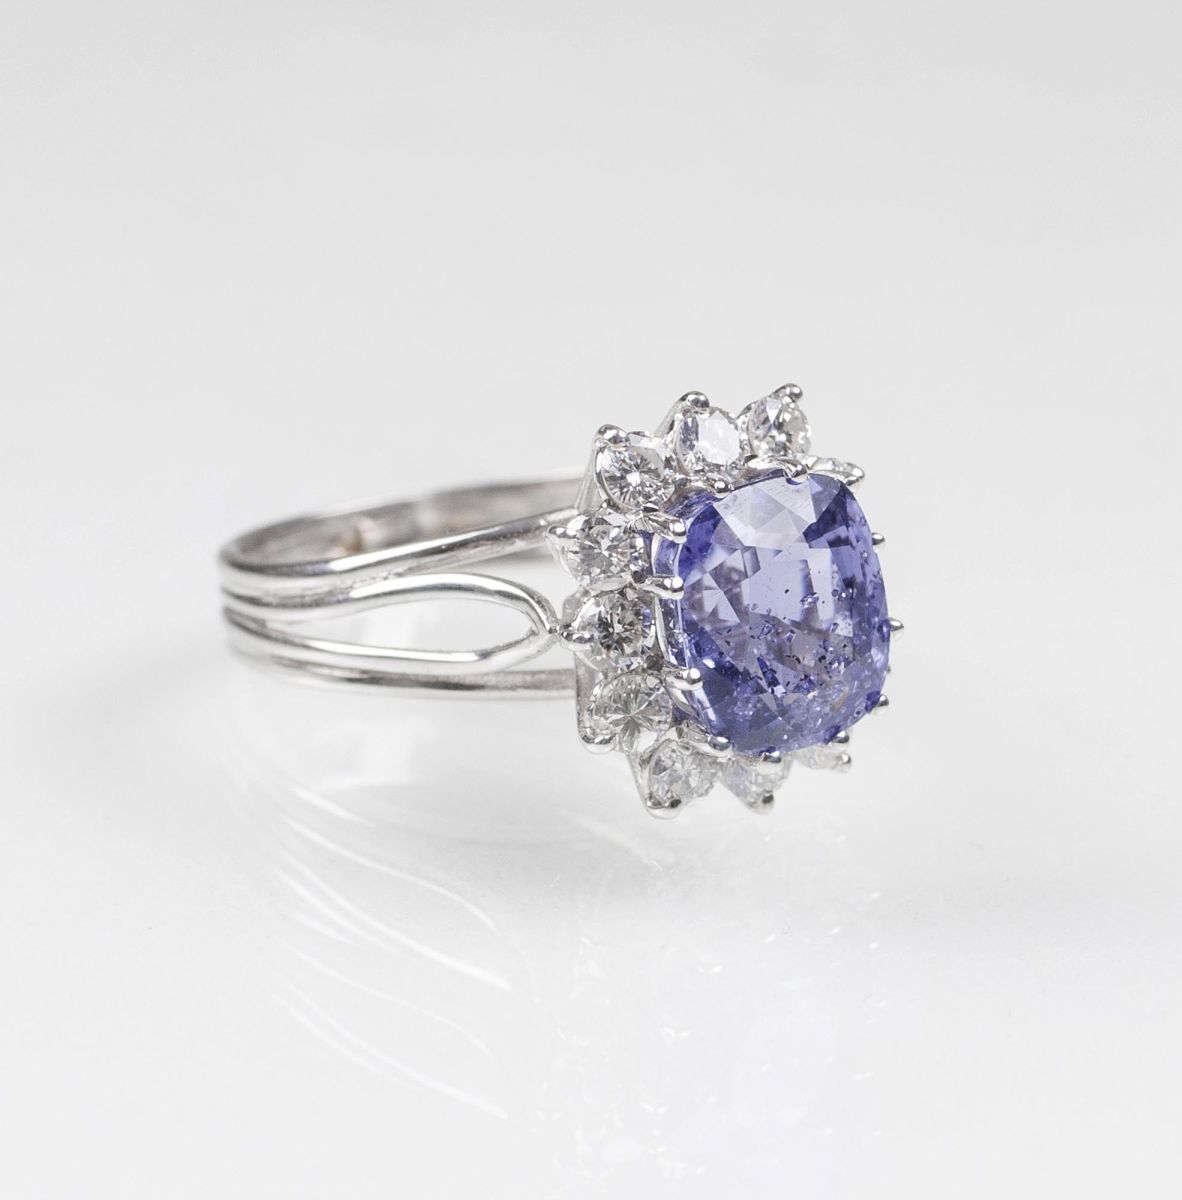 A very fine, natural Sapphire Ring with Diamonds - image 2